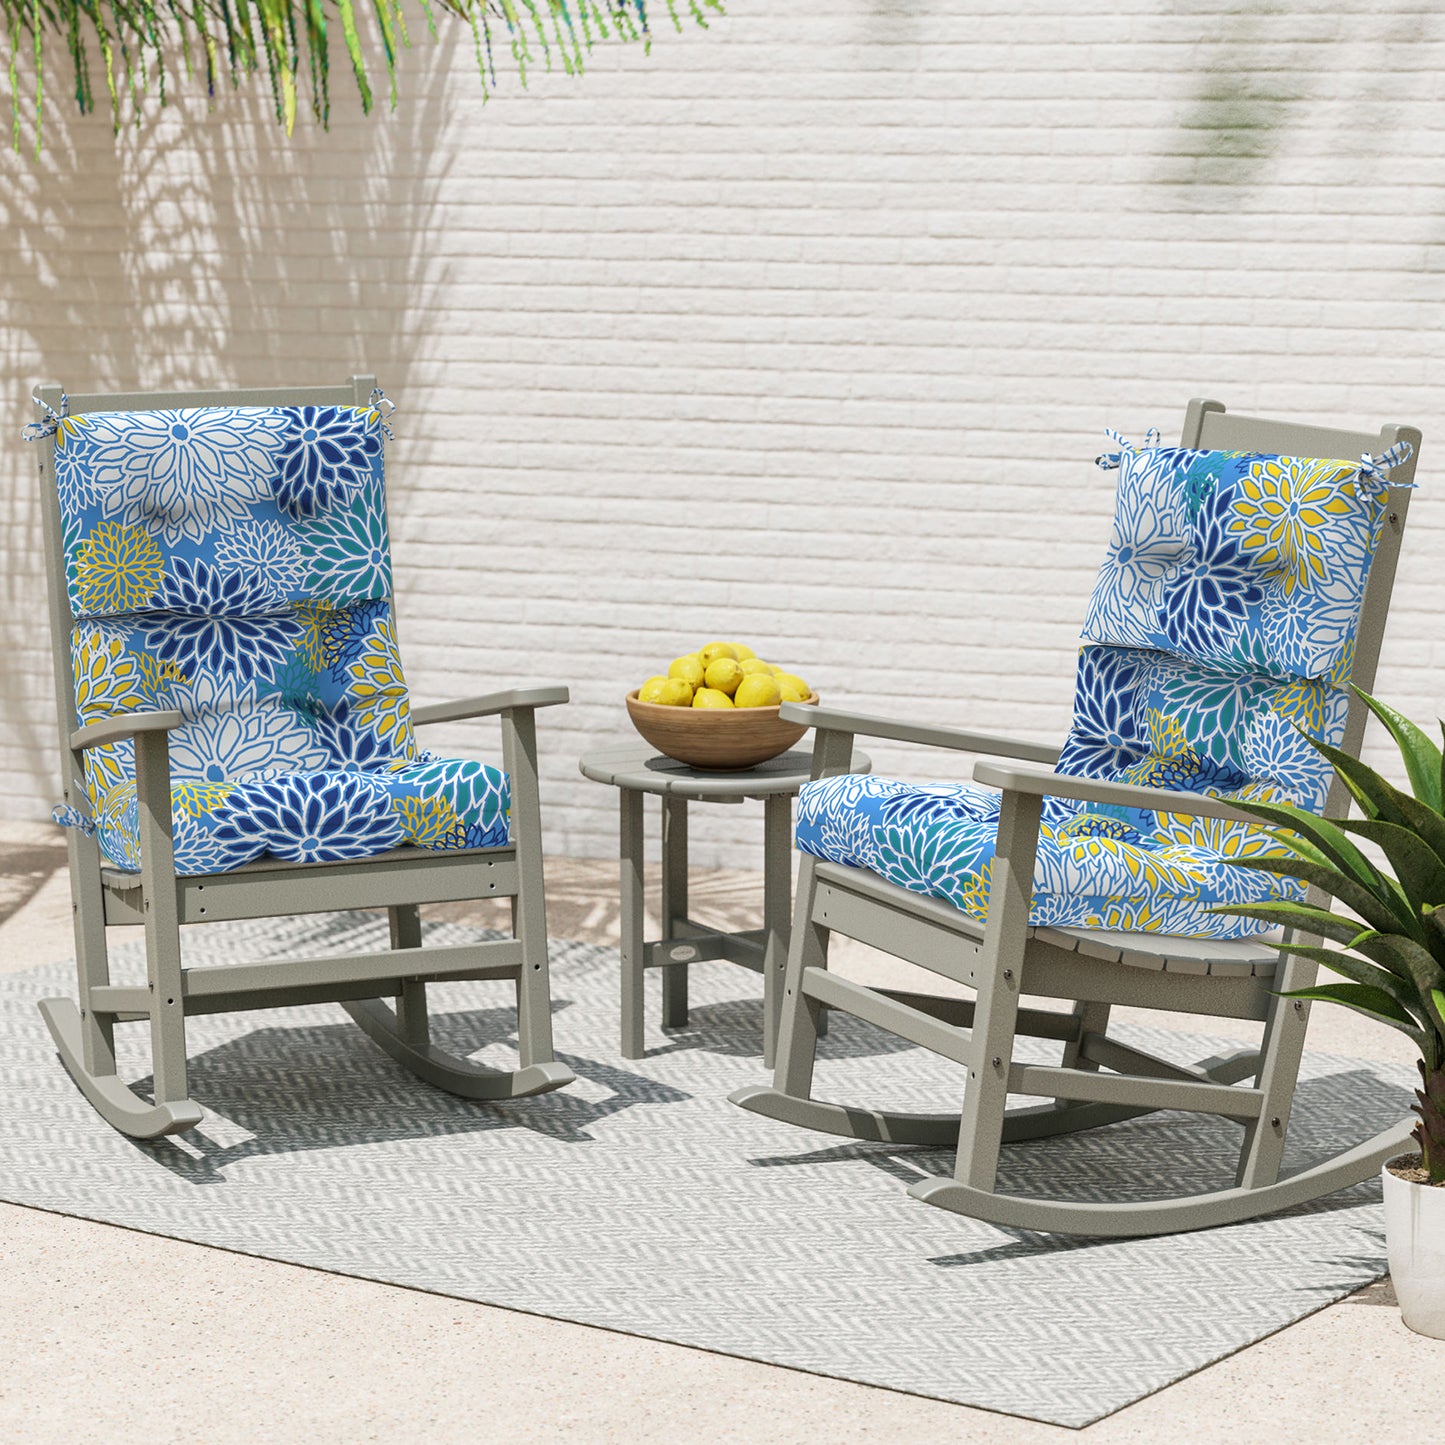 Melody Elephant Outdoor Tufted High Back Chair Cushions, Water Resistant Rocking Seat Chair Cushions 2 Pack, Adirondack Cushions for Patio Home Garden, 22" W x 20" D, Dahlia Blue